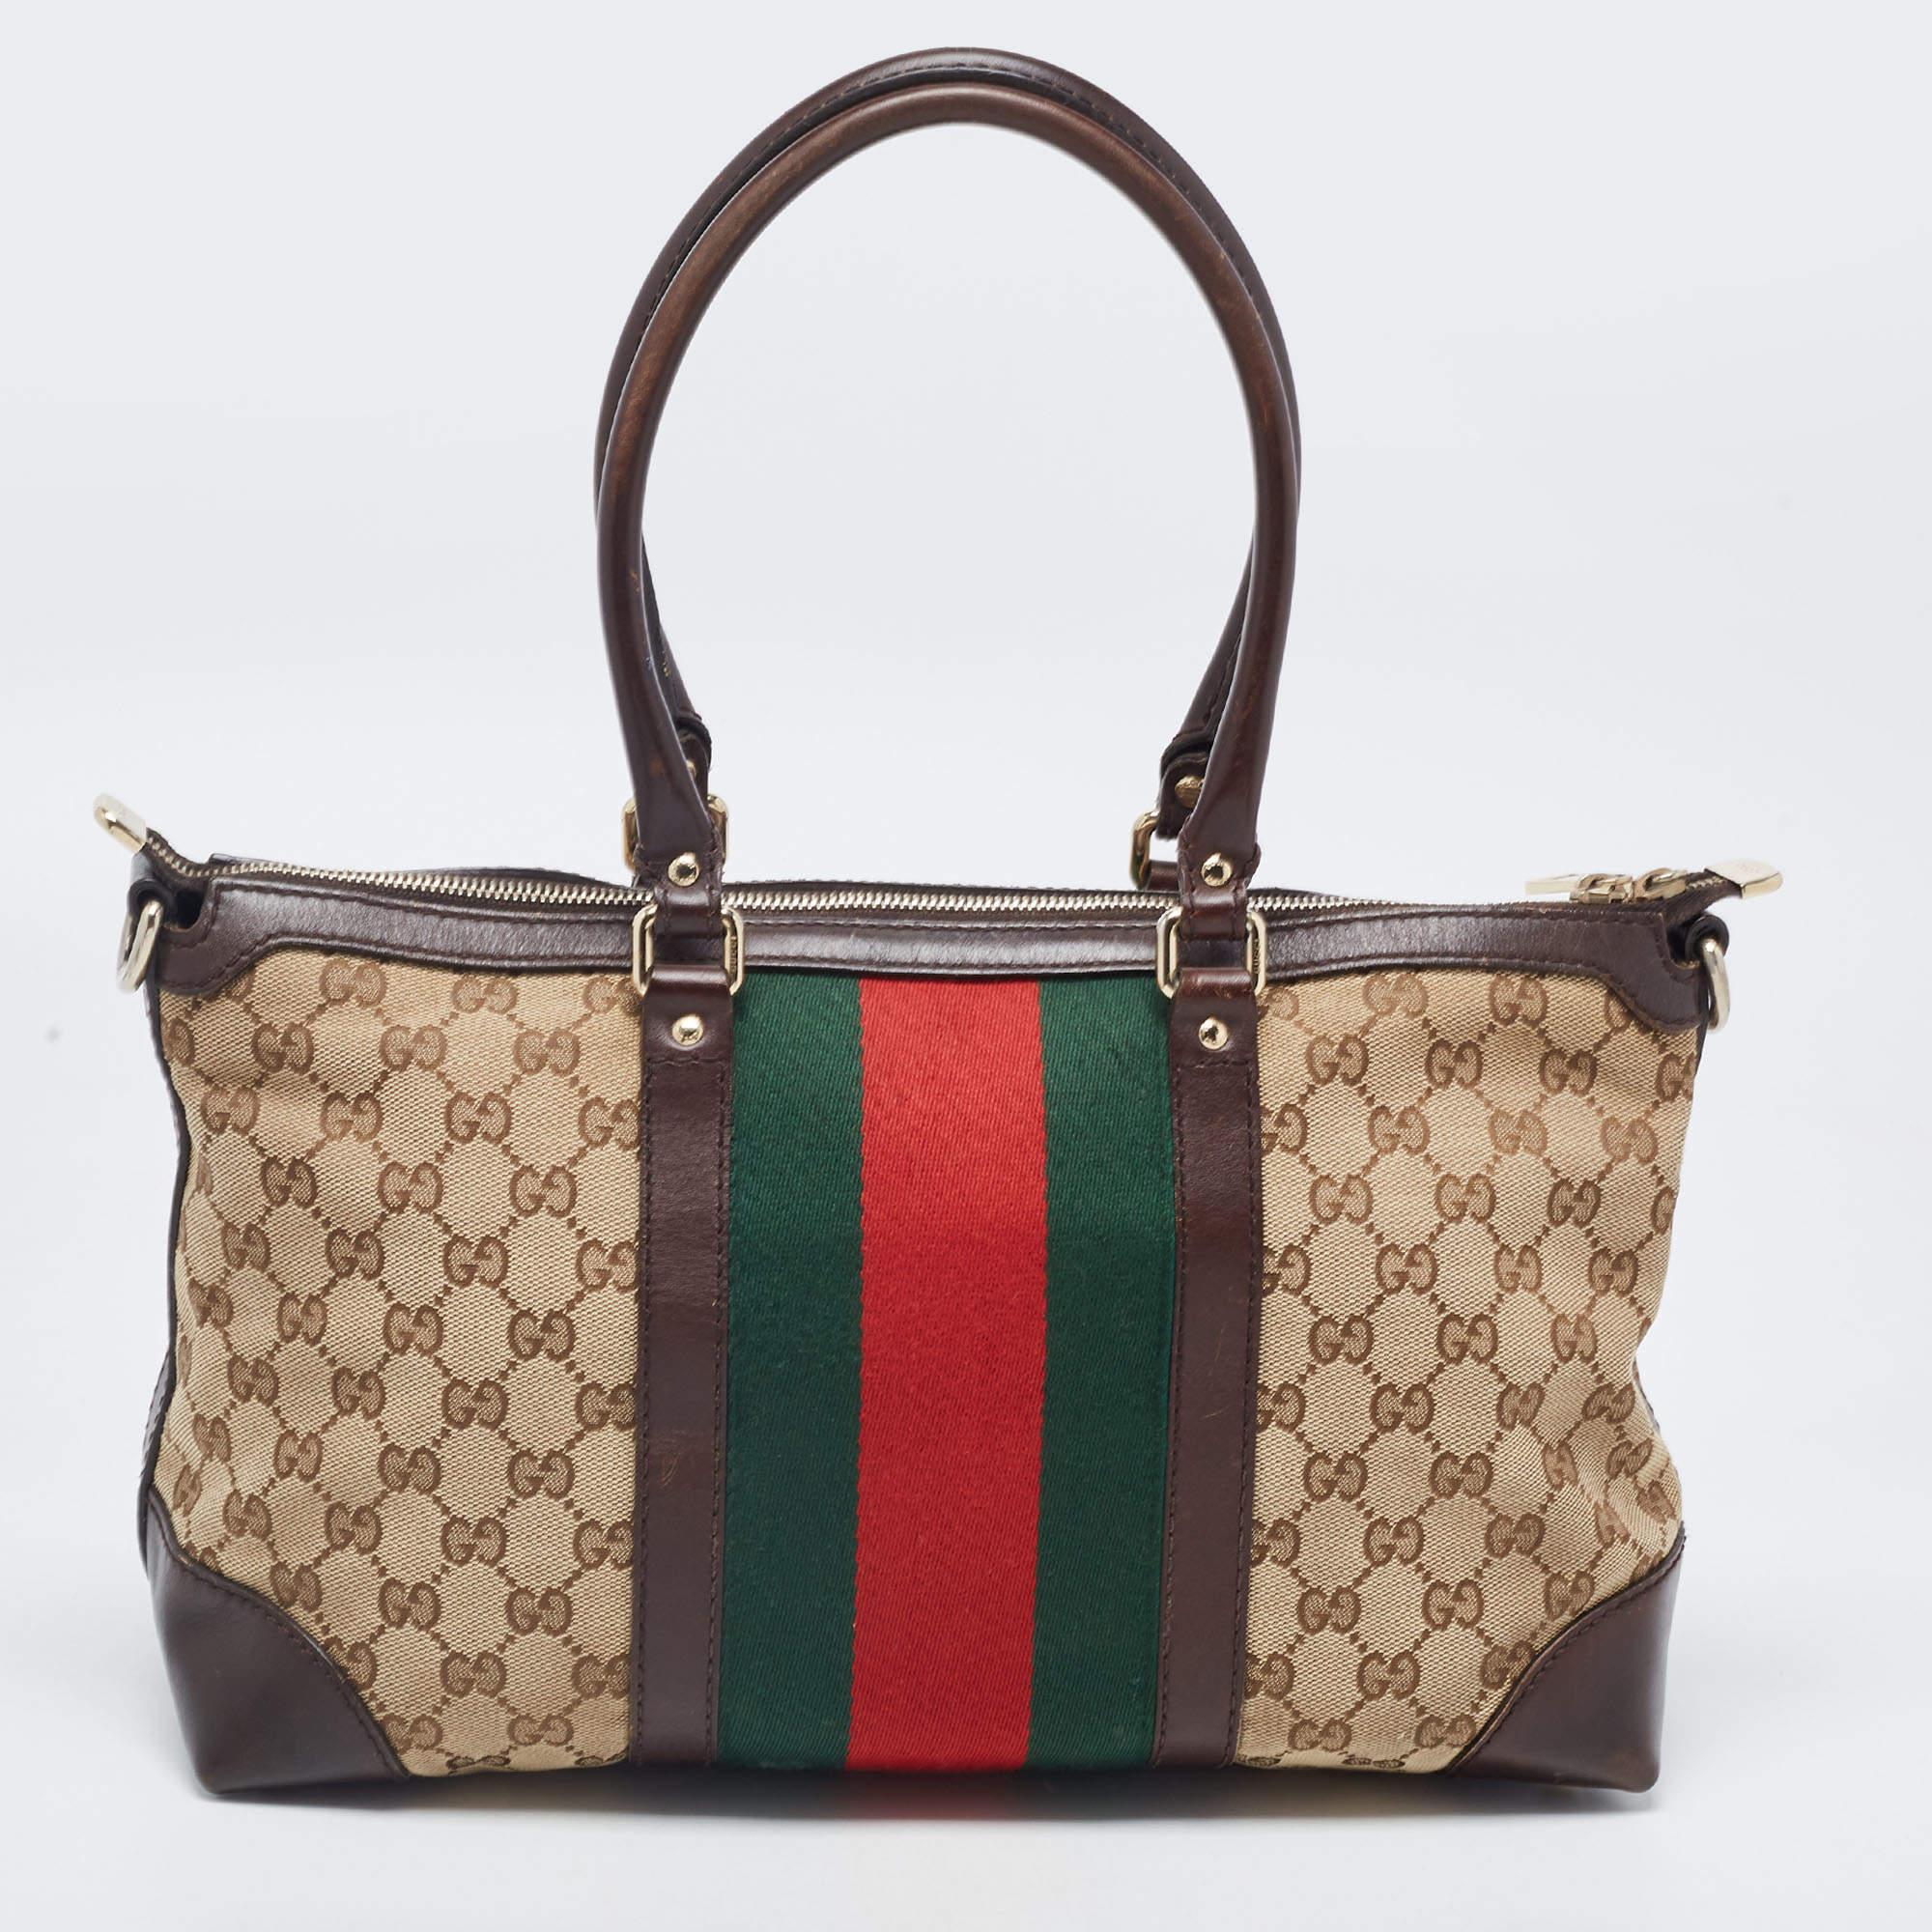 This Gucci bag is an example of the brand's fine designs that are skillfully crafted to project a classic charm. It is a functional creation with an elevating appeal.

Includes: Detachable Strap